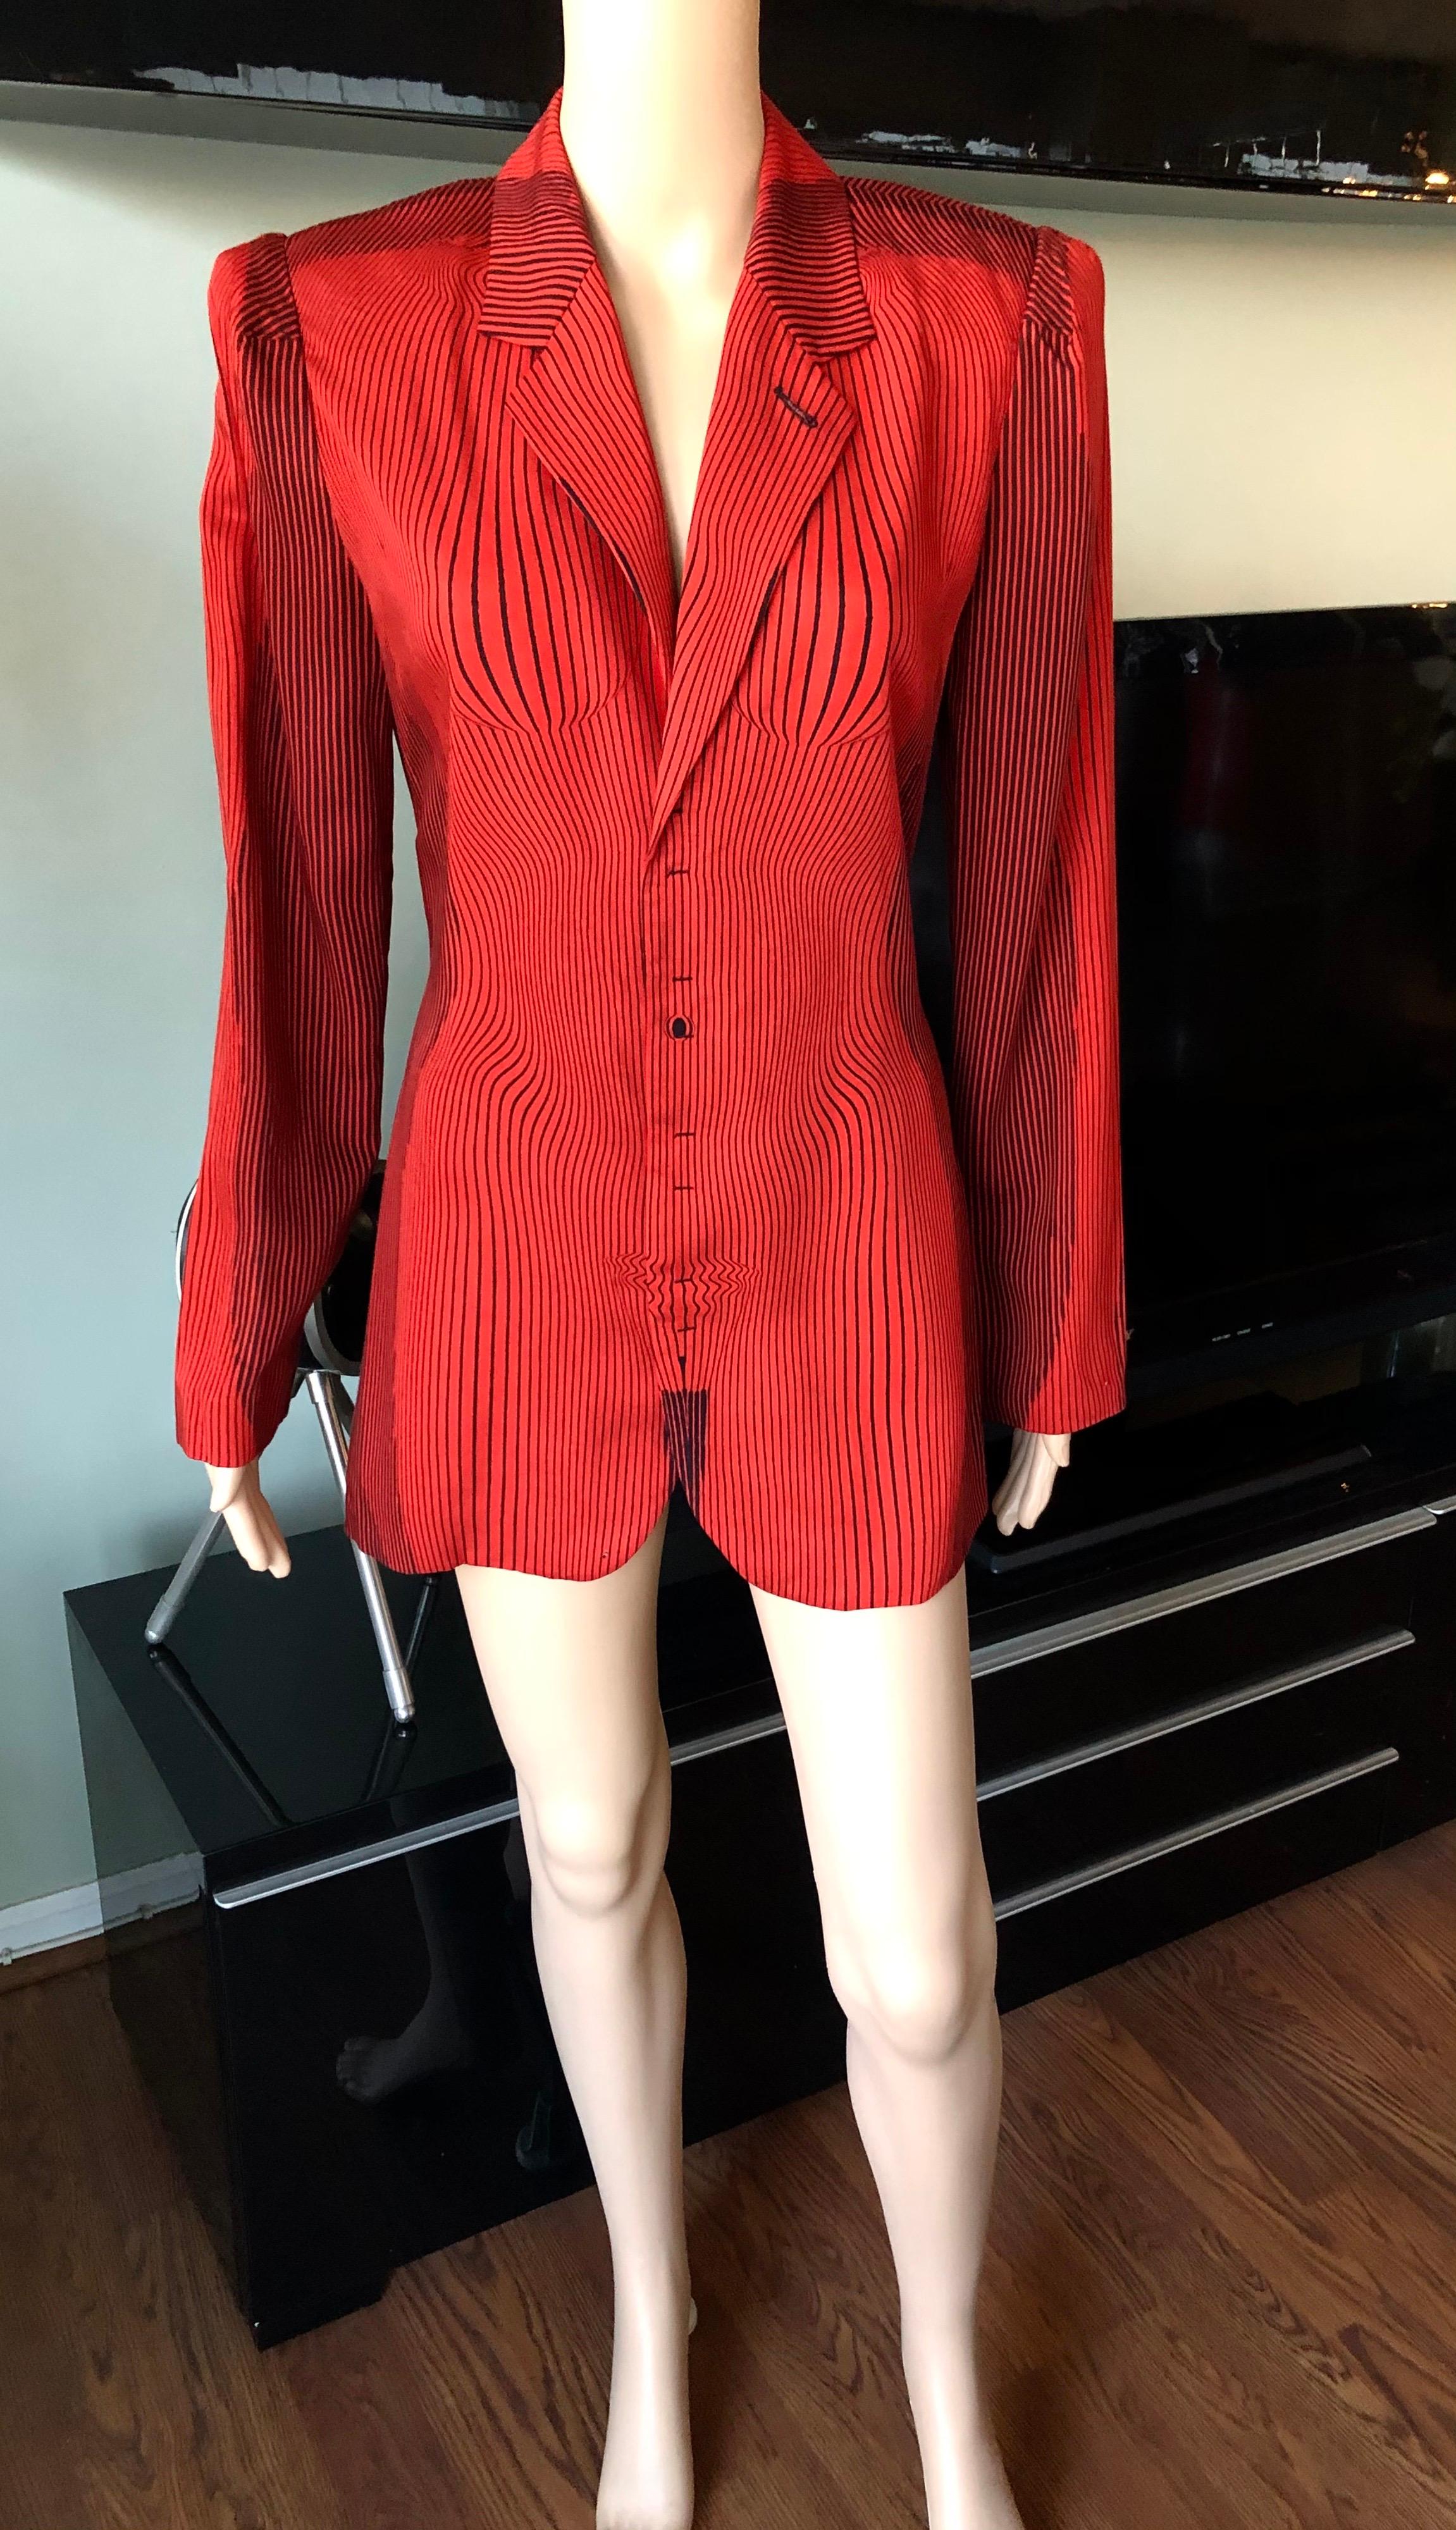 Jean Paul Gaultier S/S 1996 Vintage Cyberbaba Optical Illusion Jacket Blazer Top For Sale 1